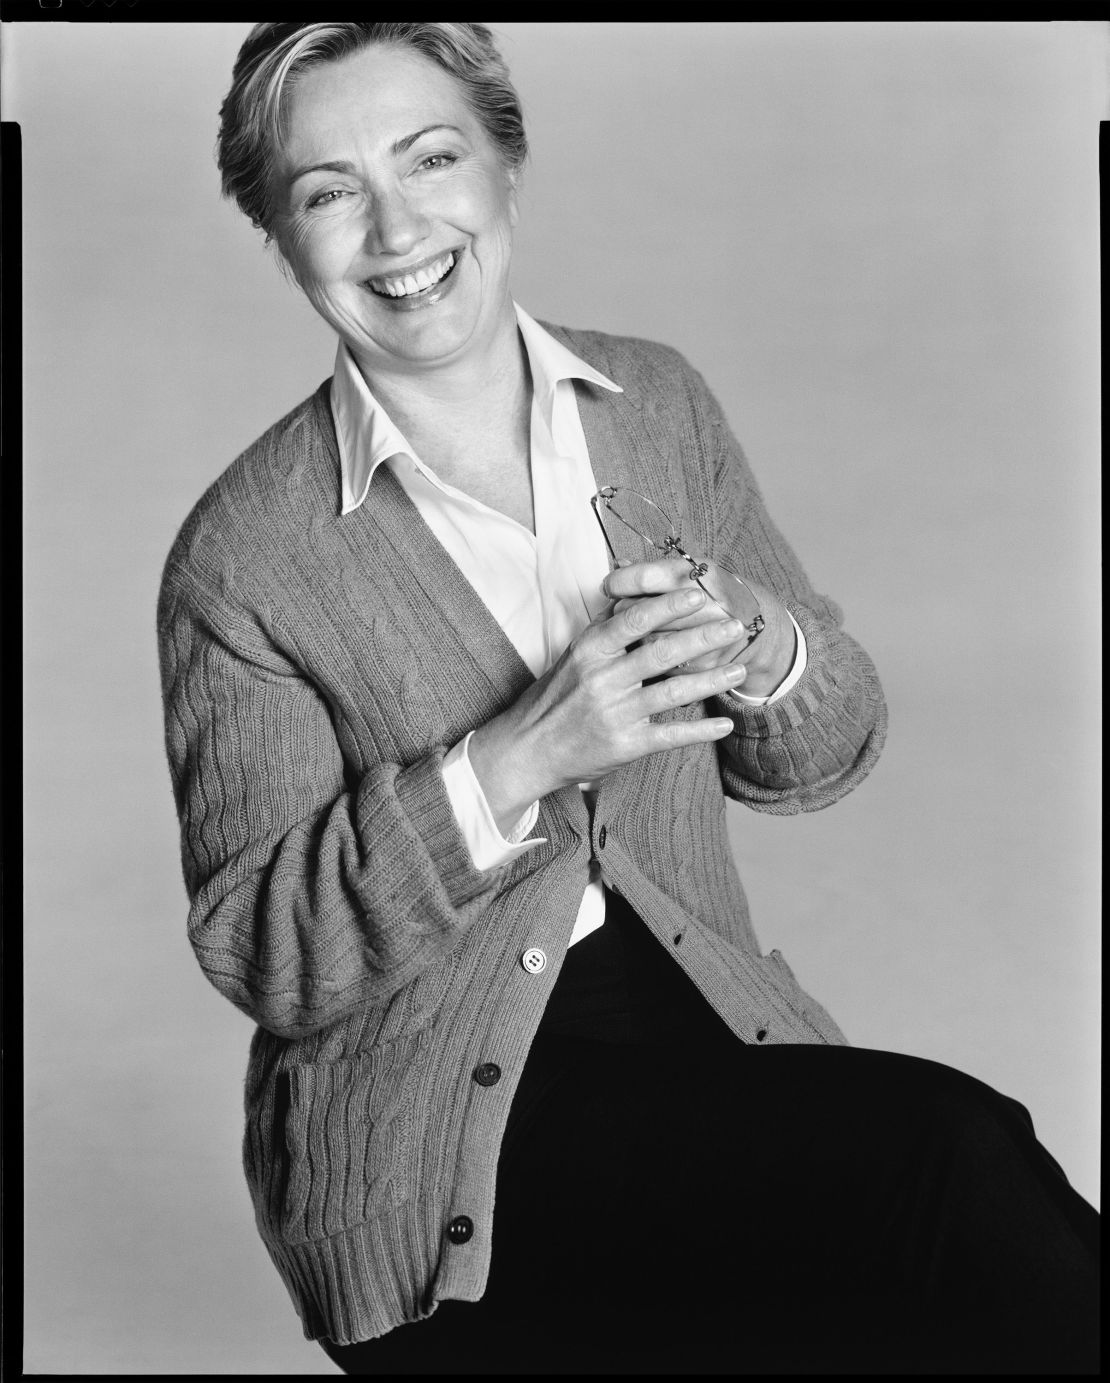 When Hillary Clinton, then a US Senator, arrived for a shoot with Avedon in 2003, she recalled him looking at her and saying, "I've seen this image before." She explained: "I was wearing a pantsuit, which had become my uniform in my Senate years. Just as he was about to start photographing, he asked me to take off my suit jacket and put on his sweater instead, which was warm and comfortable — just like Richard. I couldn't help but laugh and the photo he captured is one of my all-time favorites."